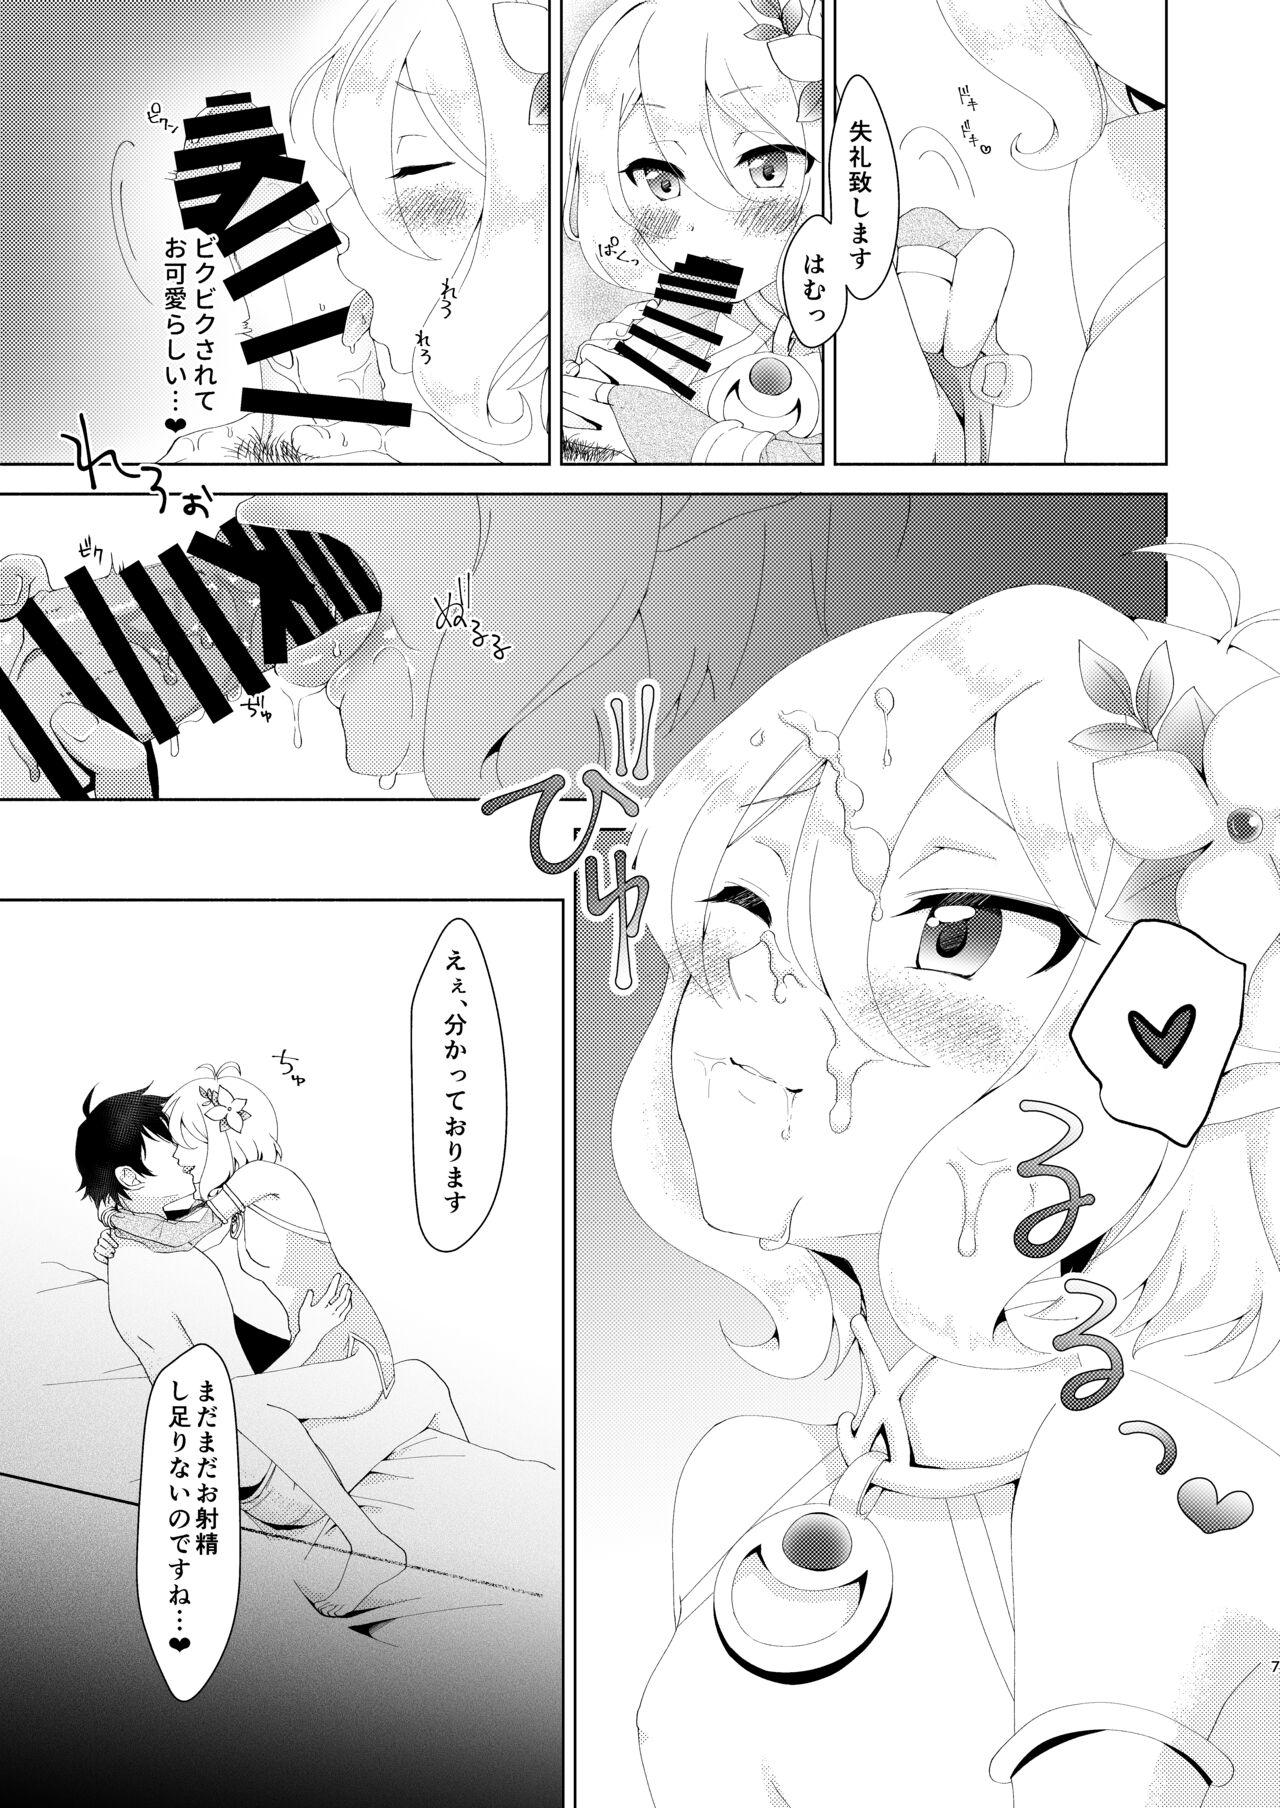 Shy Yandere Connect - Princess connect Blondes - Page 5